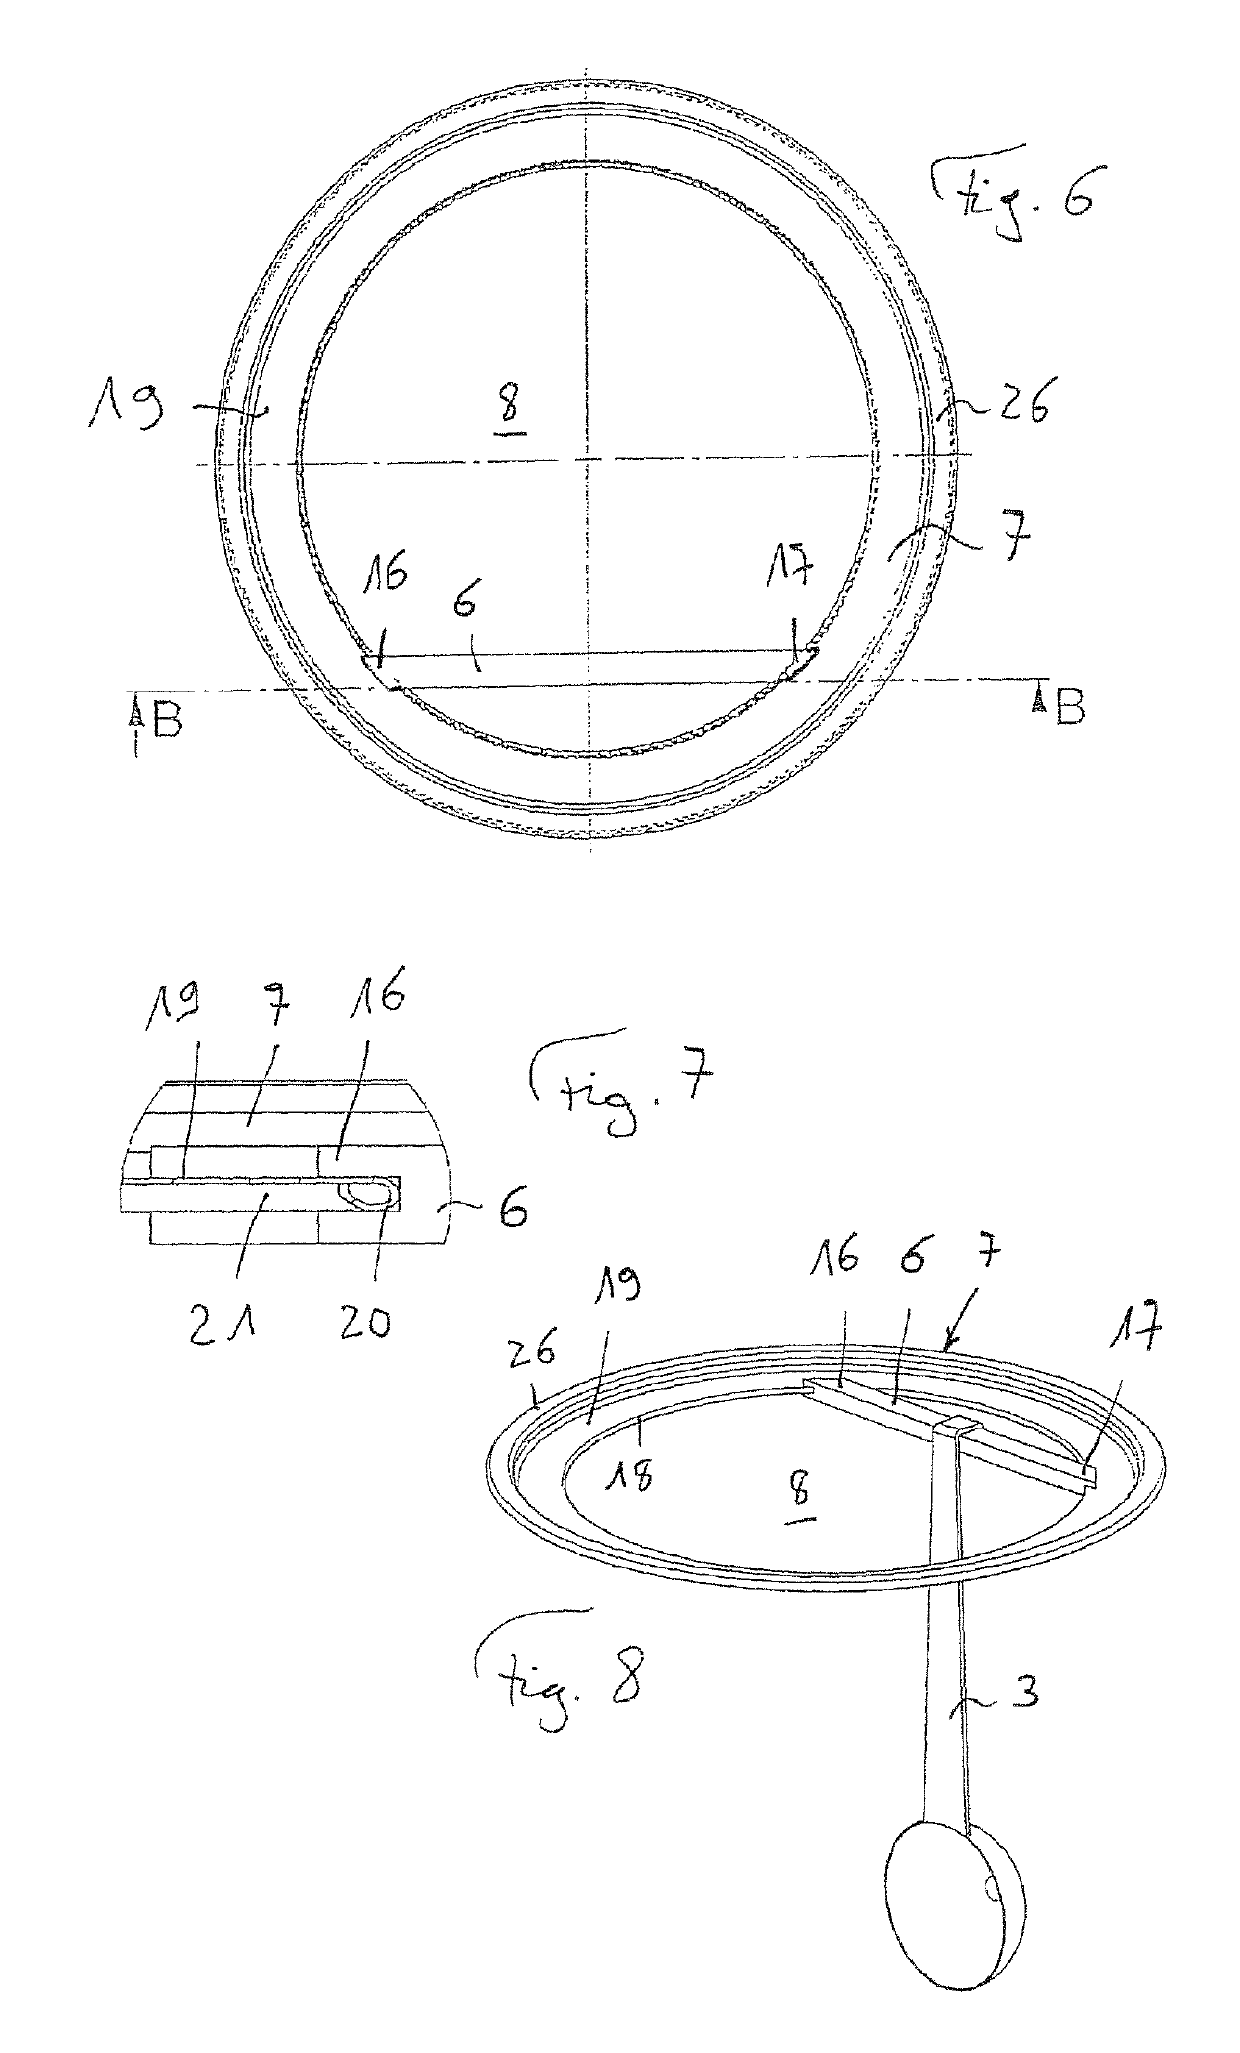 Package comprising peel-off lid and dosing spoon